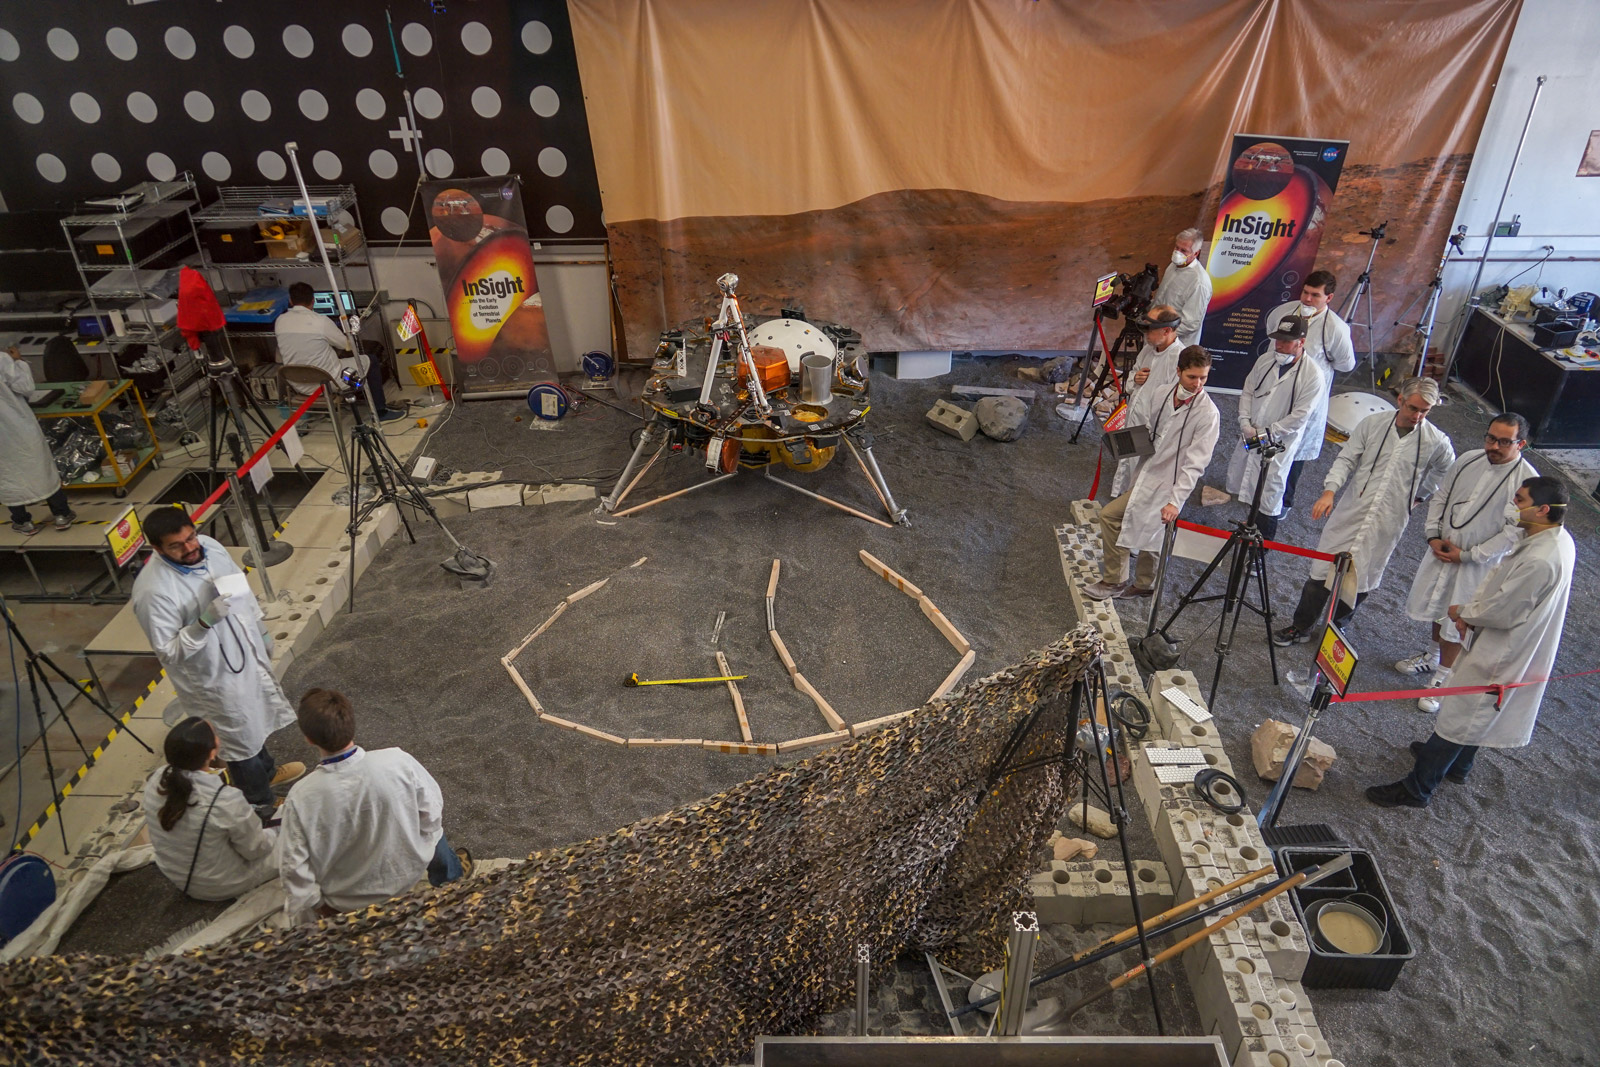 Engineers in Pasadena, California, sculpt a gravel-like material to mimic the terrain in front of NASA's InSight lander on Mars. Recreating the exact conditions will allow them to practice setting down the lander's instruments here on Earth before it's done on Mars.